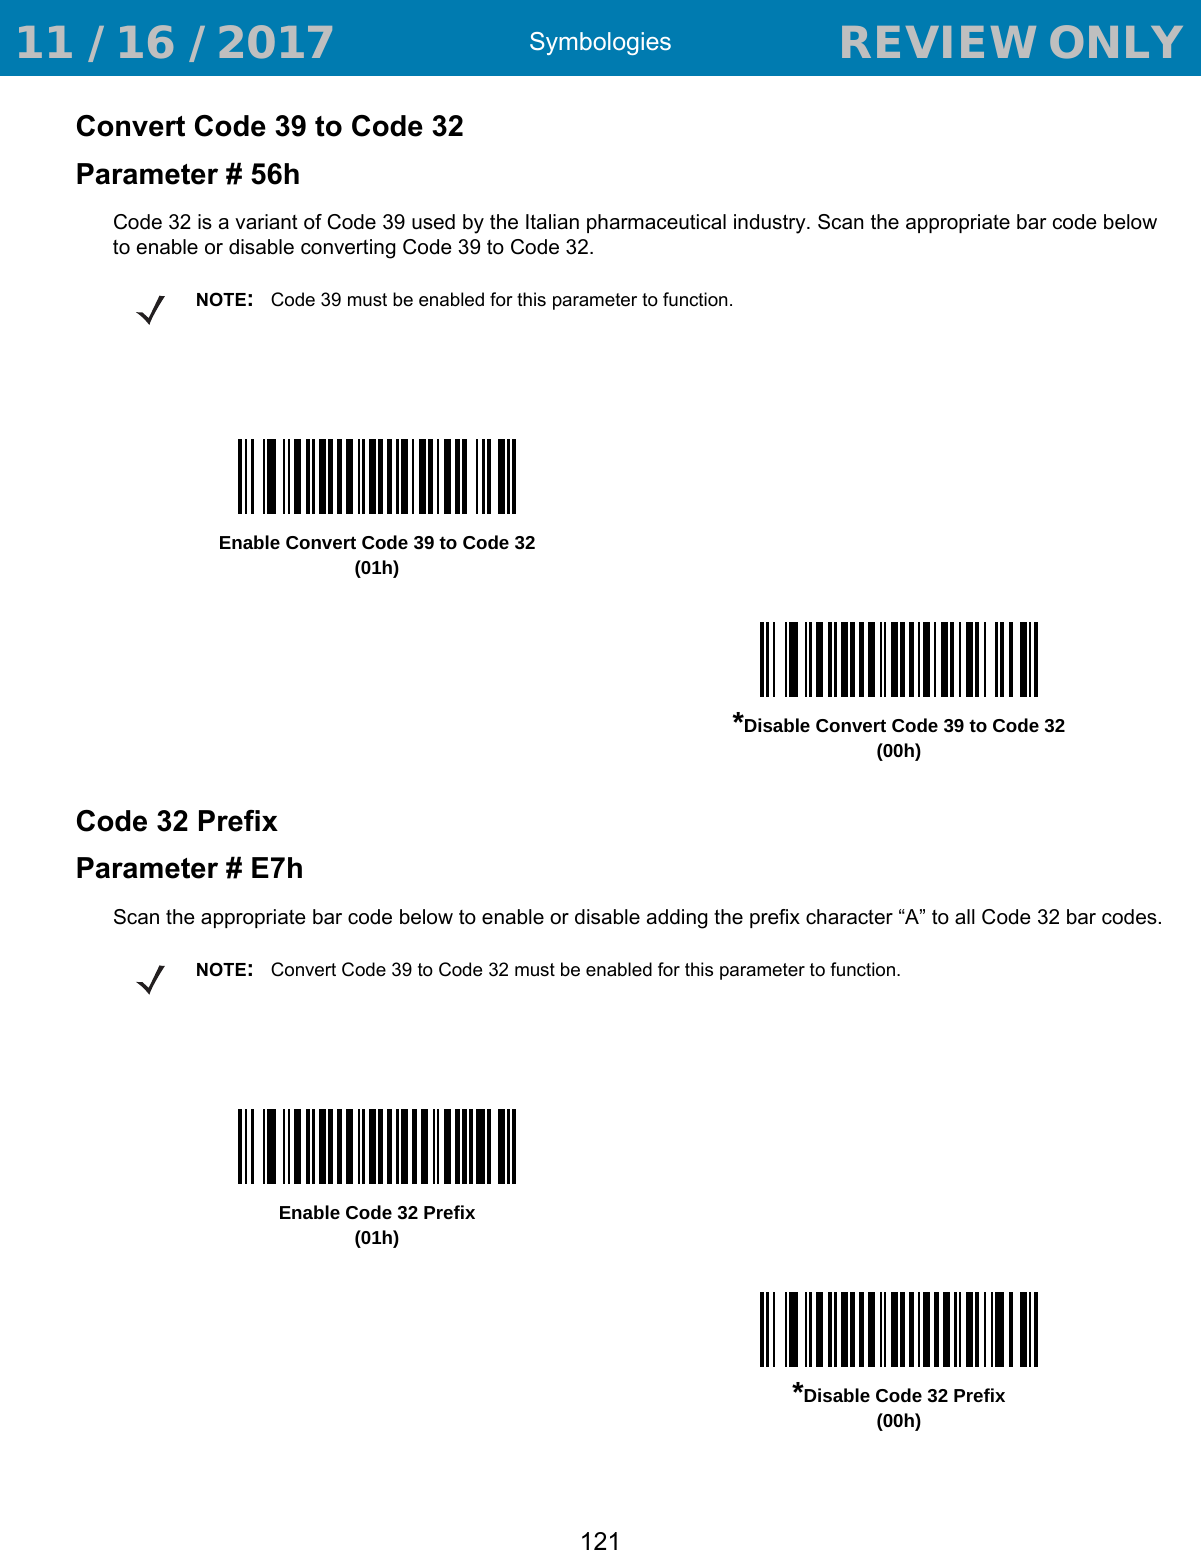 Symbologies121Convert Code 39 to Code 32Parameter # 56hCode 32 is a variant of Code 39 used by the Italian pharmaceutical industry. Scan the appropriate bar code below to enable or disable converting Code 39 to Code 32.Code 32 PrefixParameter # E7hScan the appropriate bar code below to enable or disable adding the prefix character “A” to all Code 32 bar codes.NOTE:Code 39 must be enabled for this parameter to function.Enable Convert Code 39 to Code 32(01h)*Disable Convert Code 39 to Code 32(00h)NOTE:Convert Code 39 to Code 32 must be enabled for this parameter to function.Enable Code 32 Prefix(01h)*Disable Code 32 Prefix(00h) 11 / 16 / 2017                                  REVIEW ONLY                             REVIEW ONLY - REVIEW ONLY - REVIEW ONLY